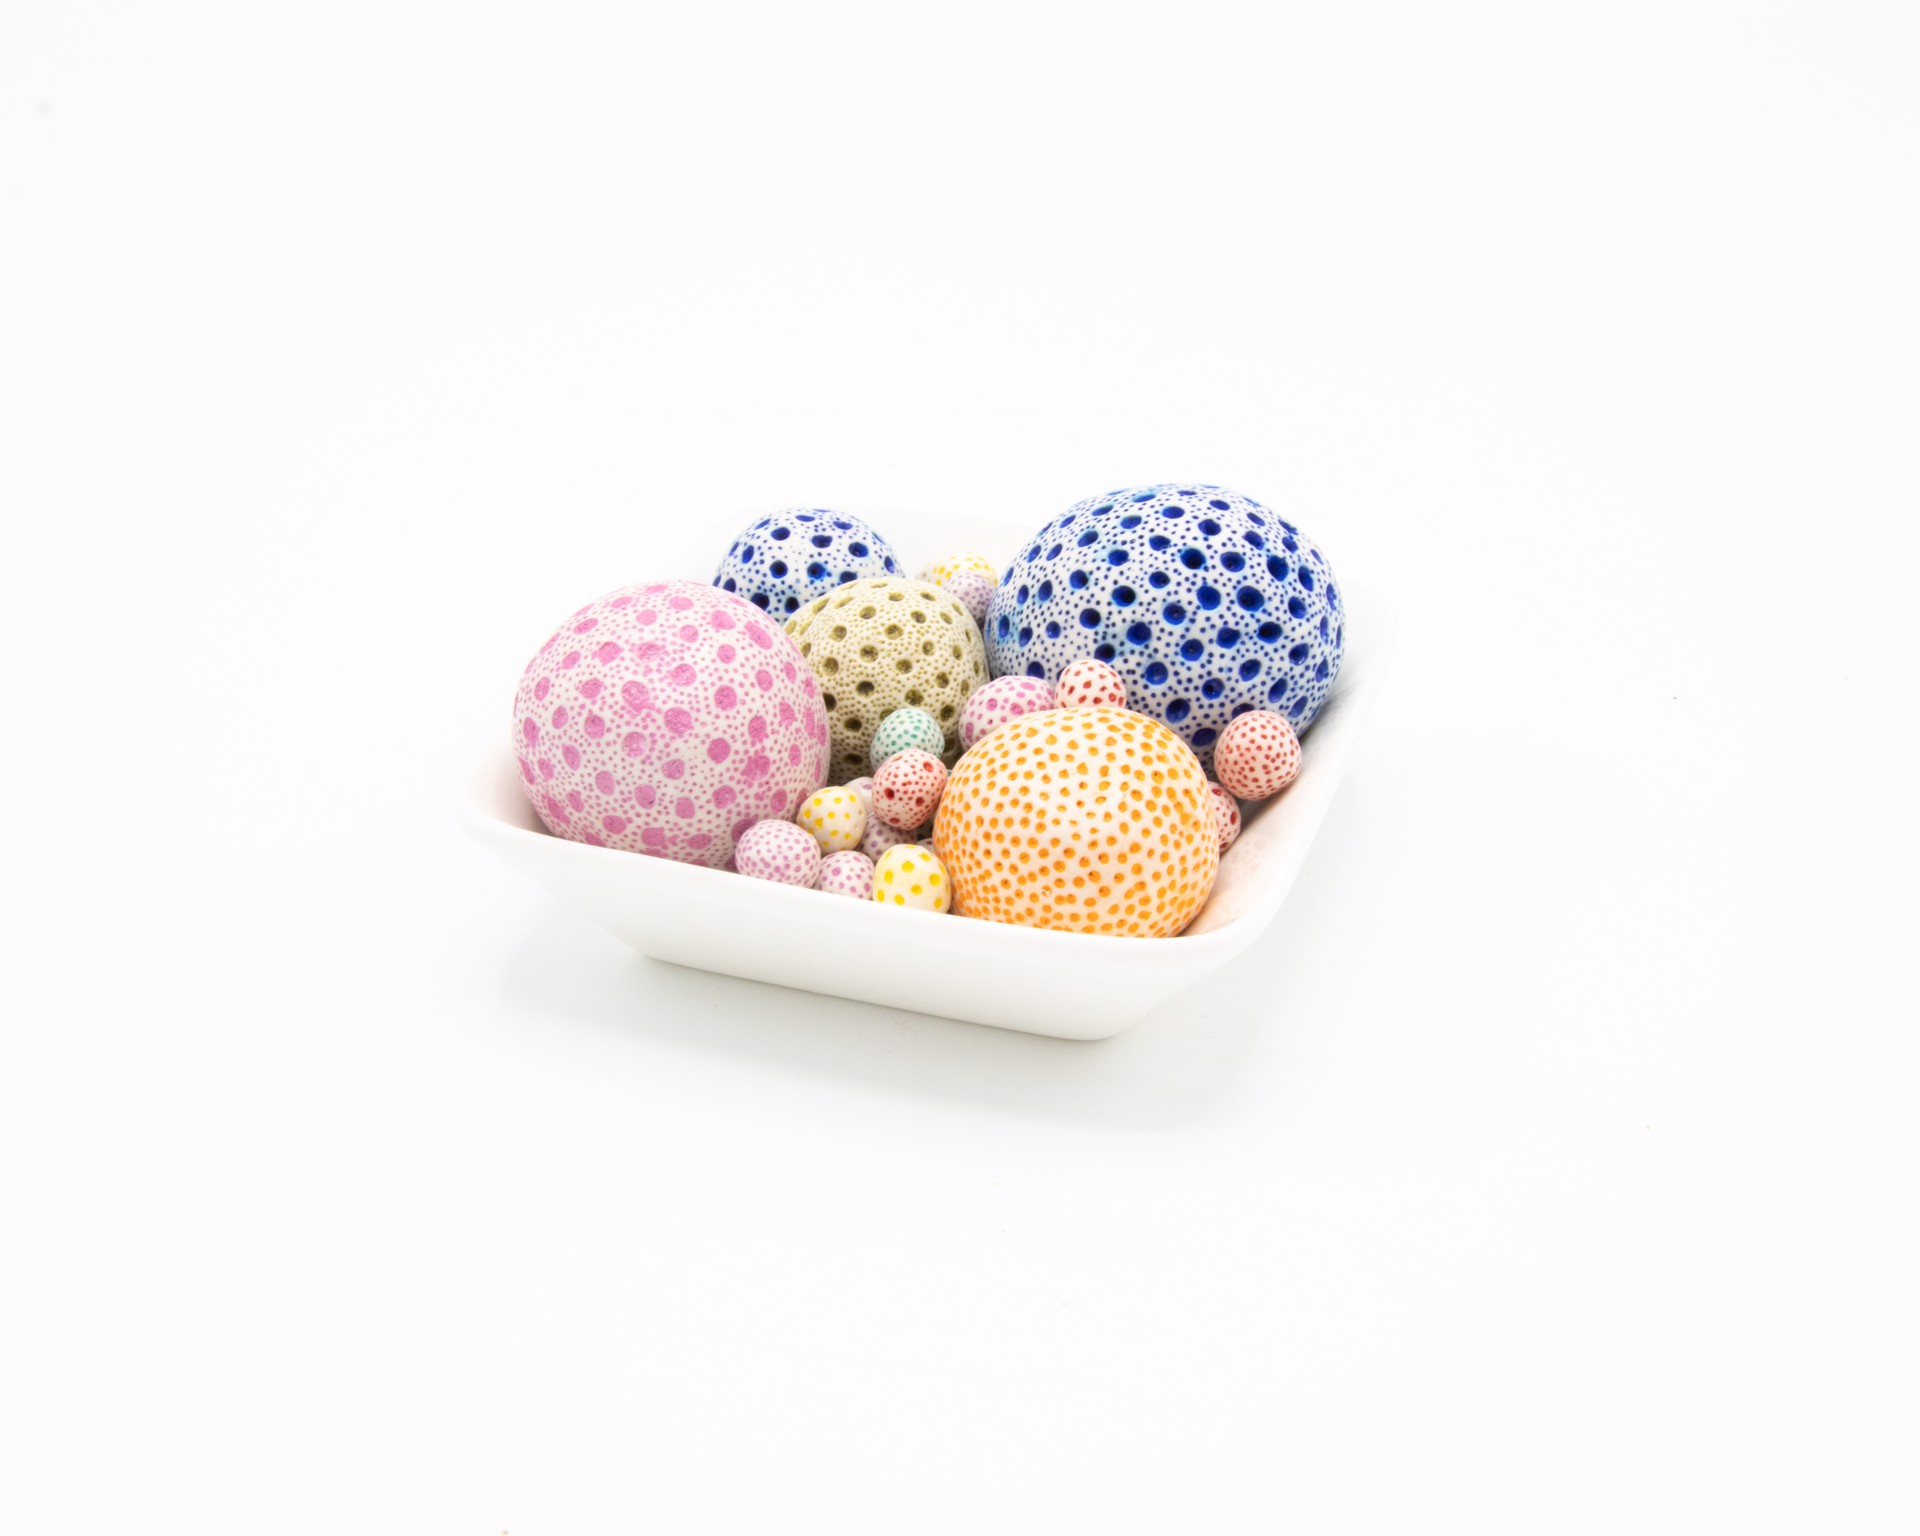 Candy Dish by Max Seinfeld